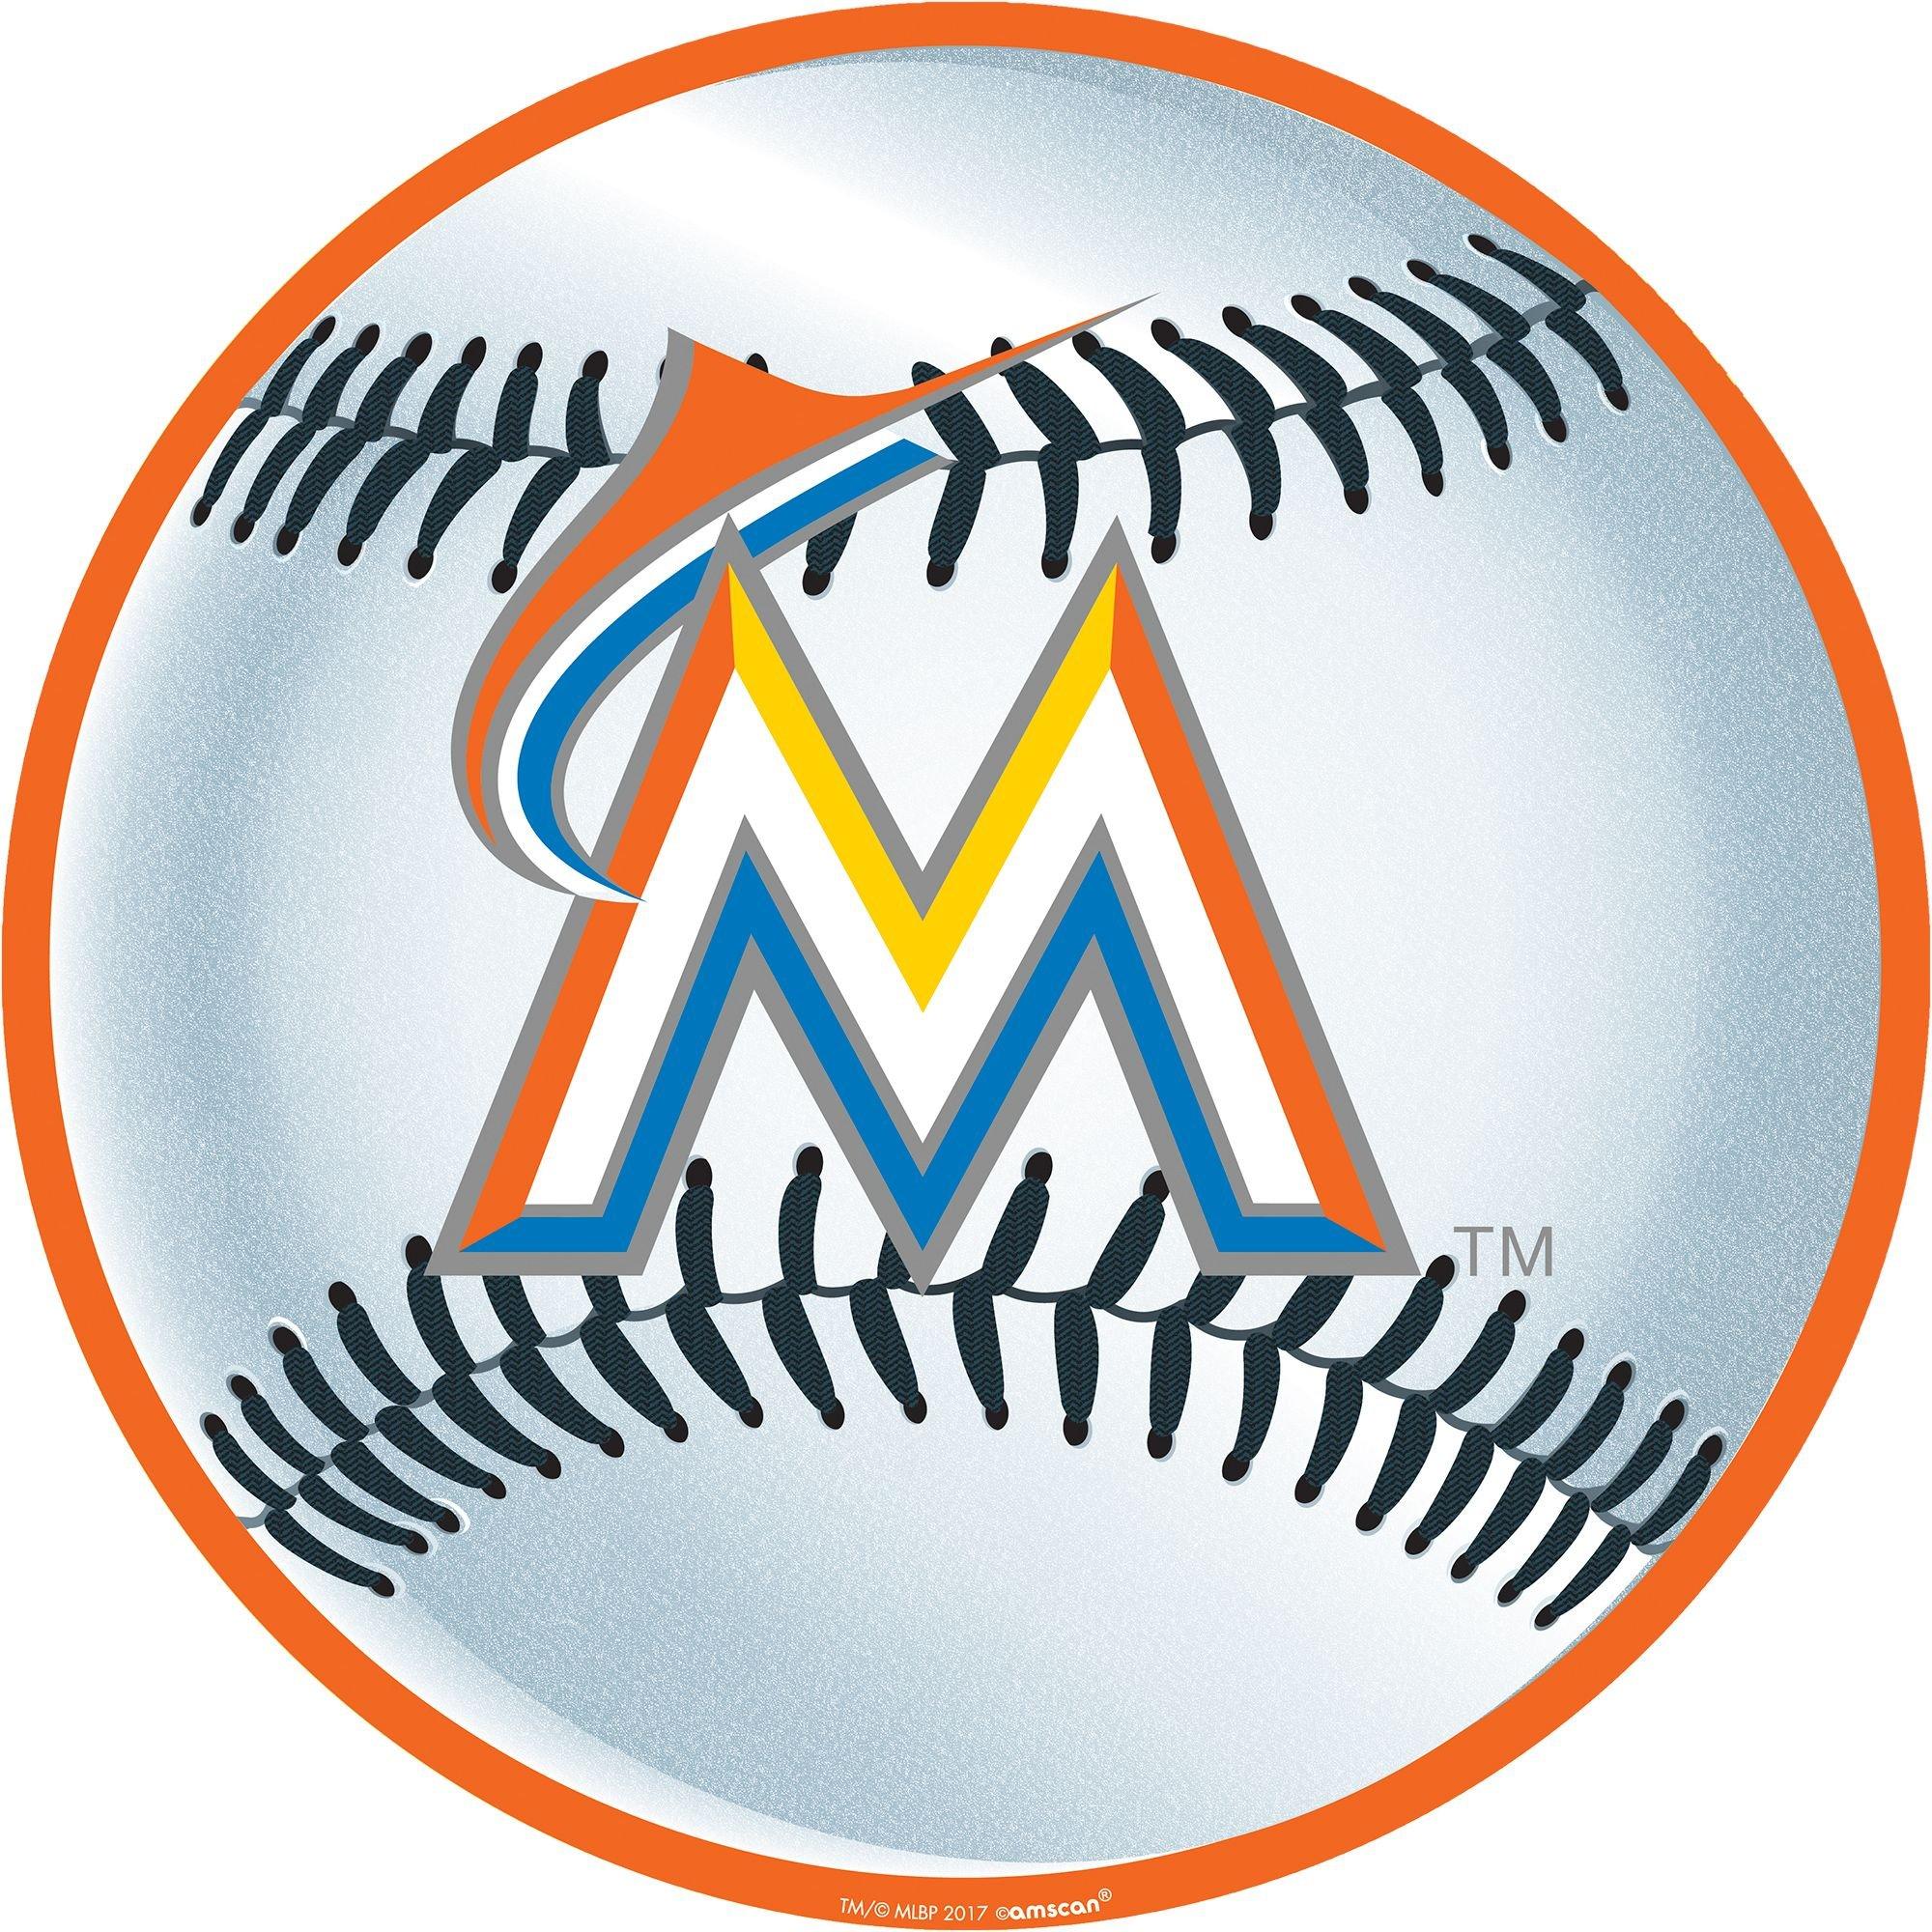 Big Show Baseball Coloring! Marlins! See 'n Match Team Colors Here Safe 'n  Free!